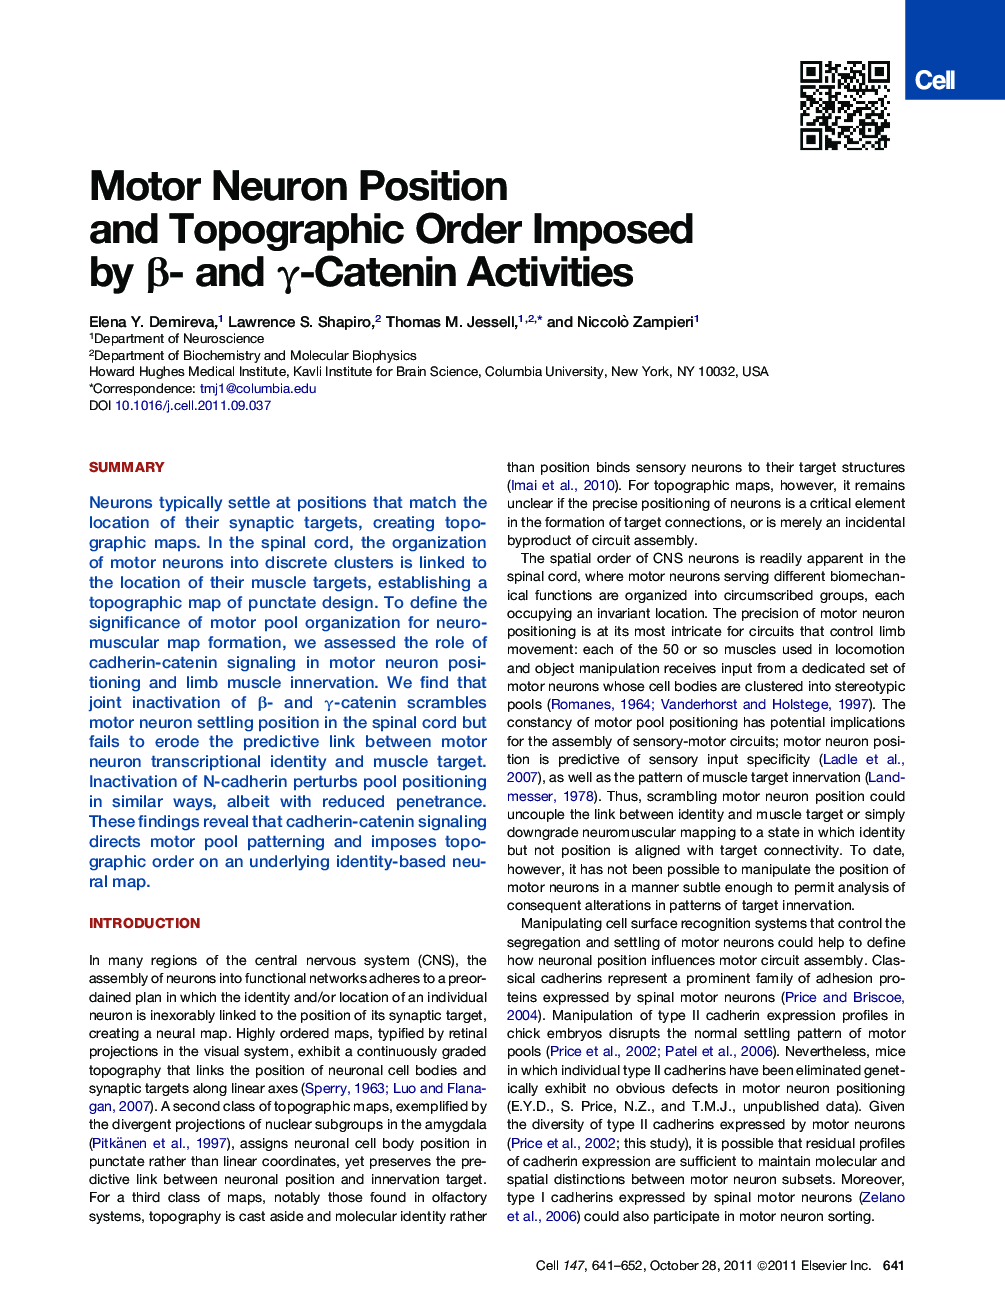 Motor Neuron Position and Topographic Order Imposed by β- and γ-Catenin Activities